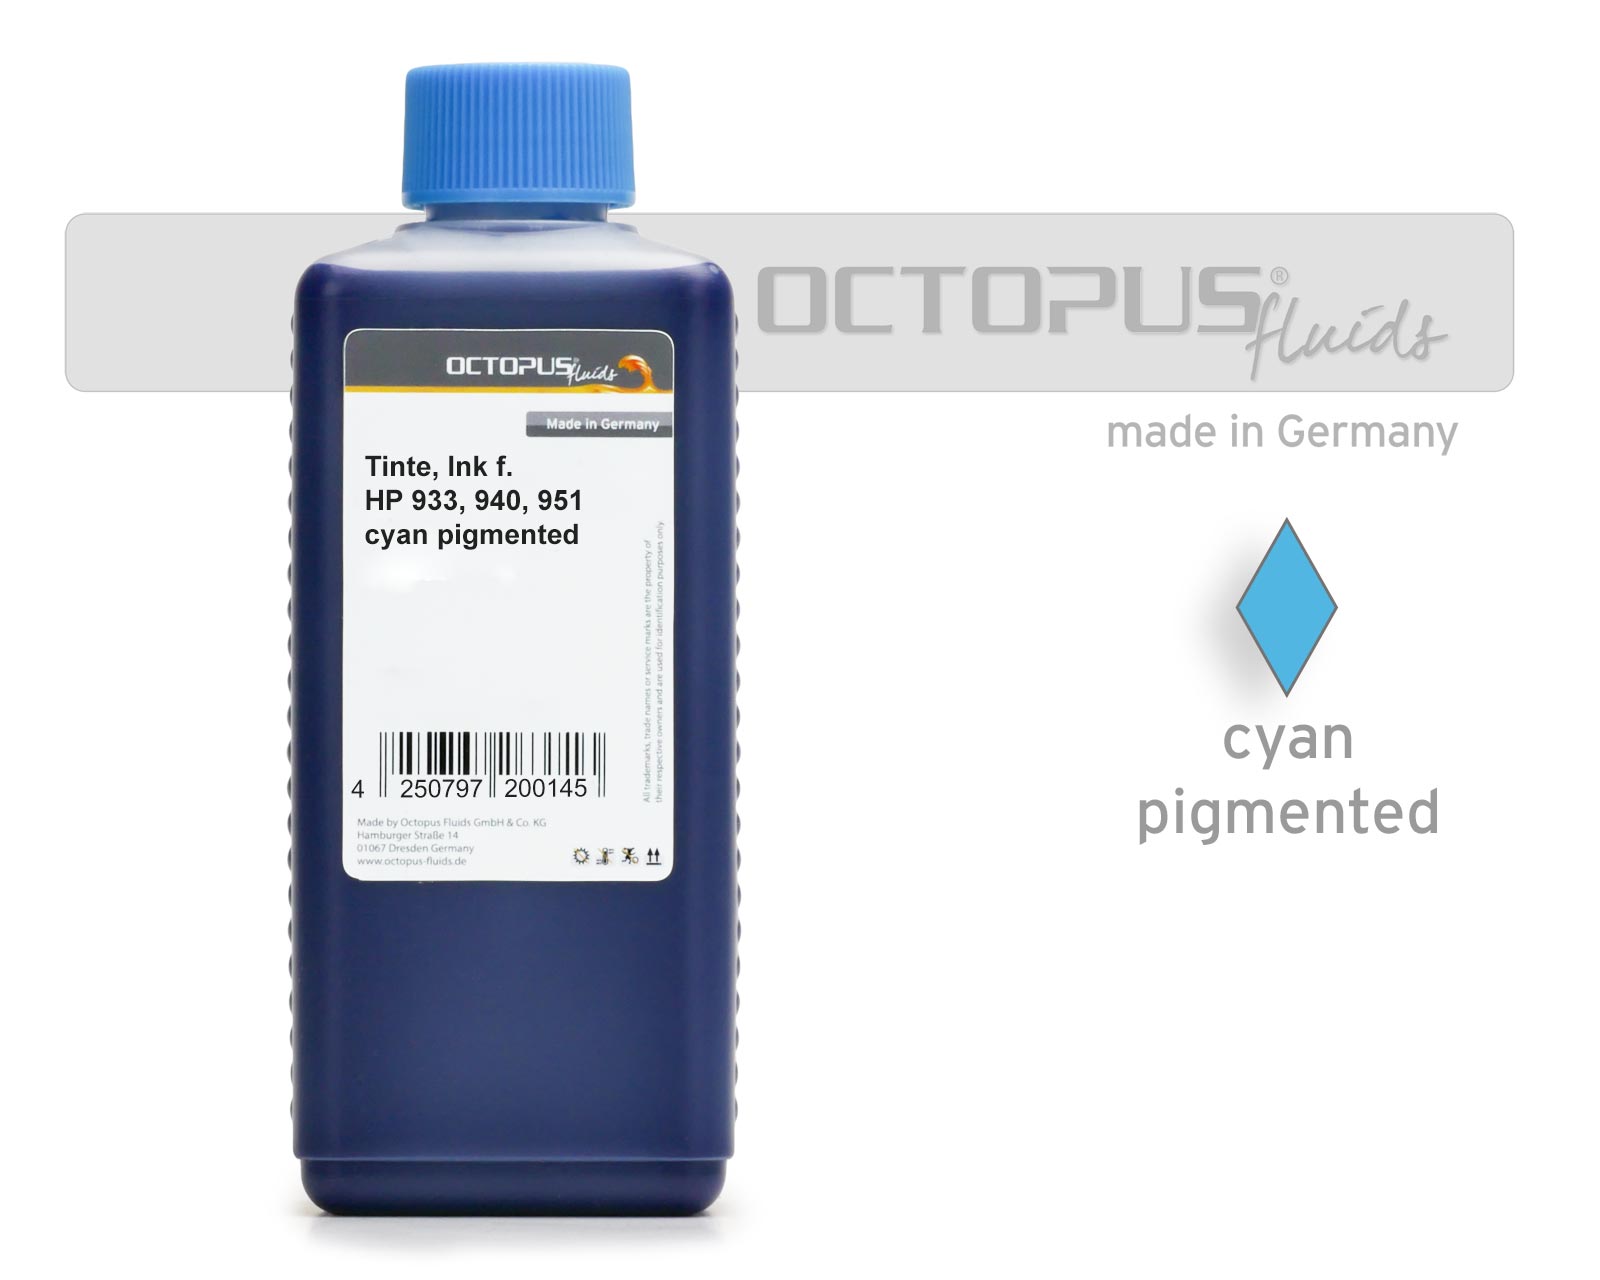 Octopus Refill Ink for HP 933, 940, 951 pigmented cyan